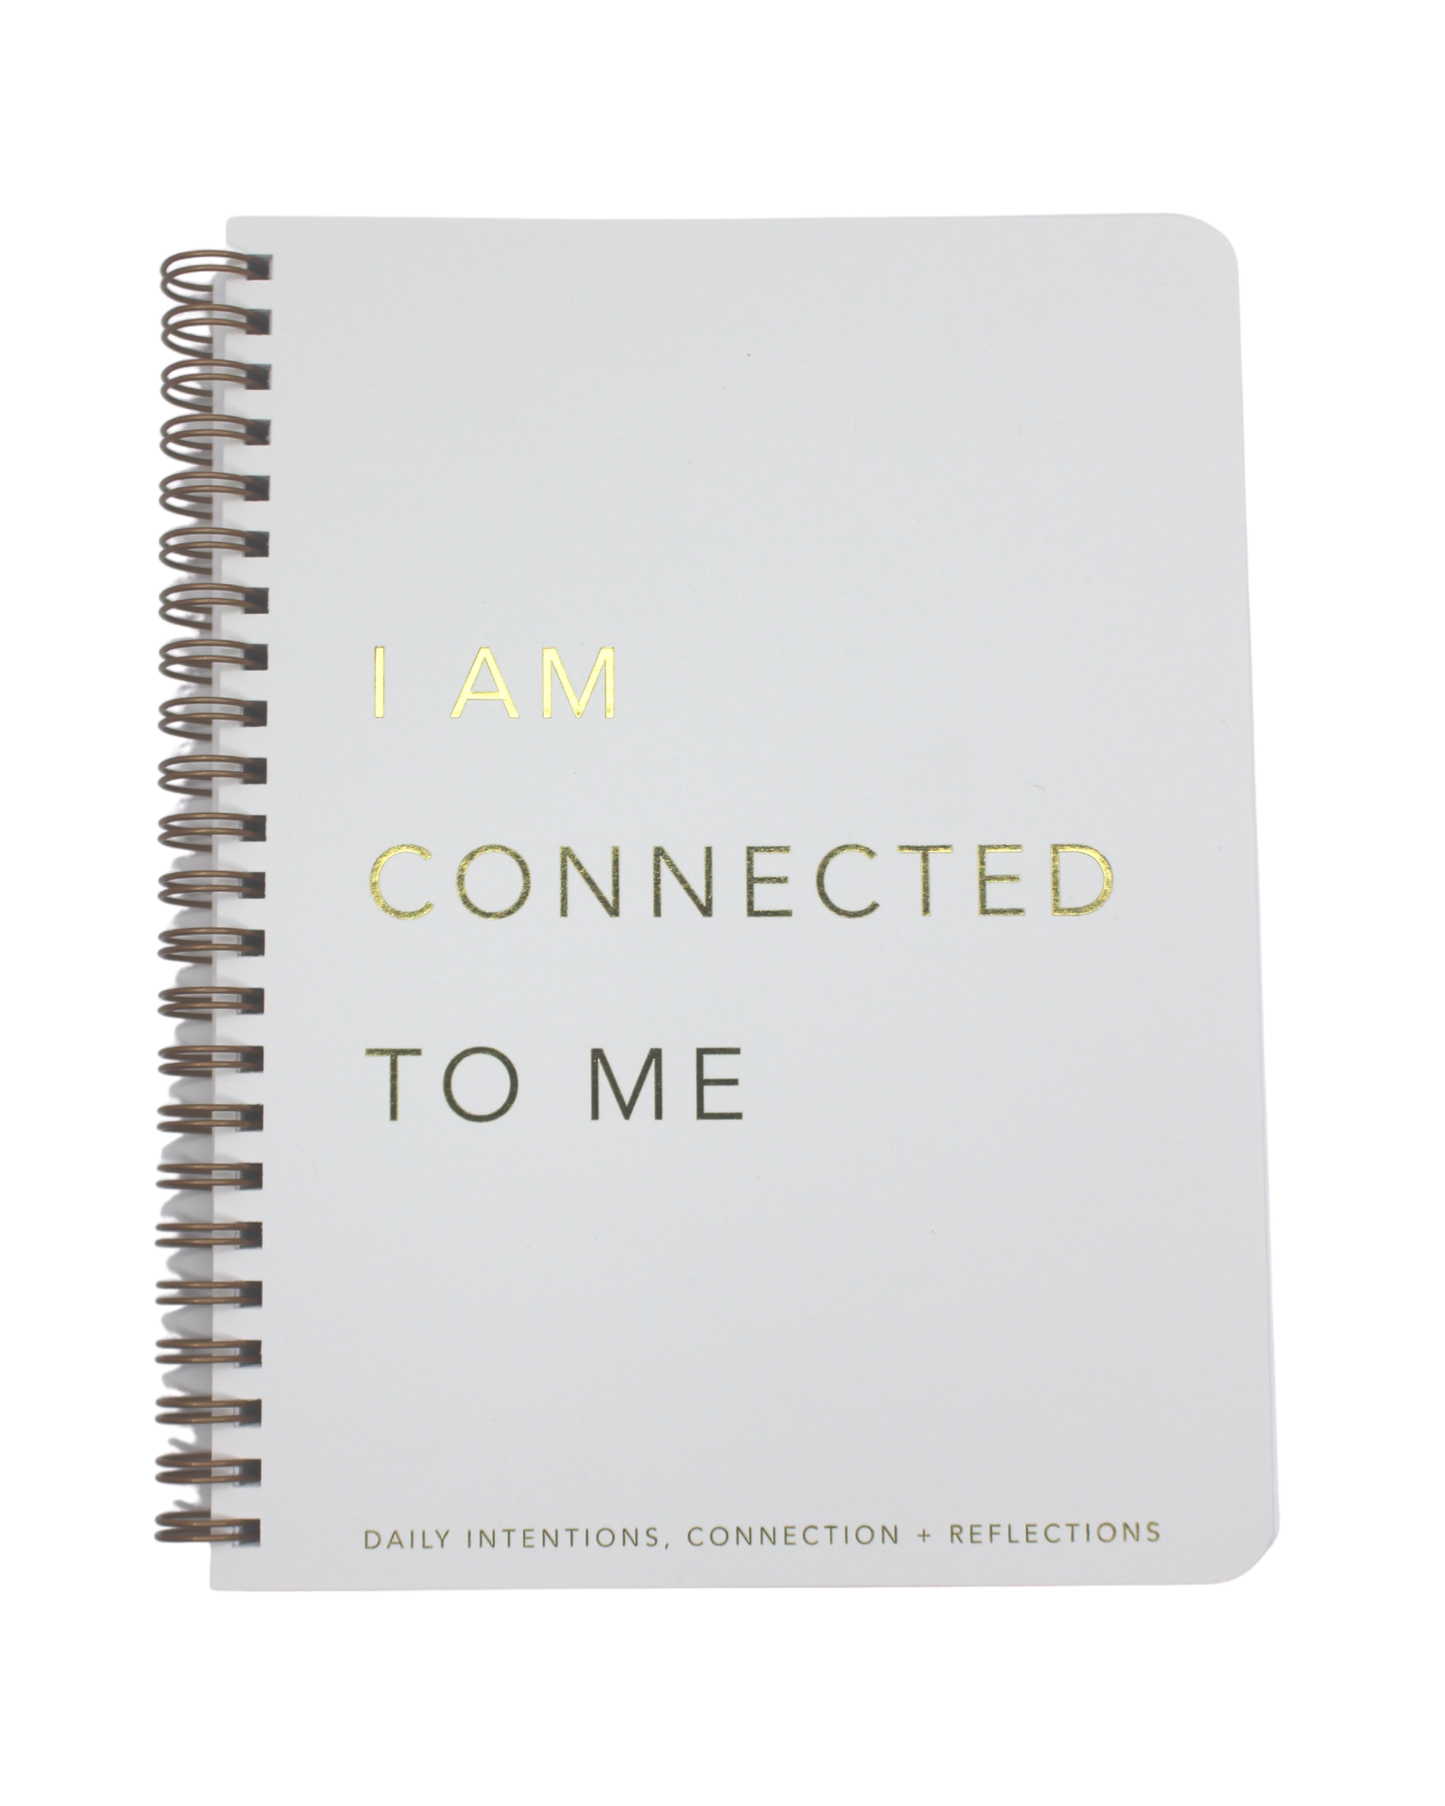 A DAILY CONNECTION + INTENTION + REFLECTION JOURNAL